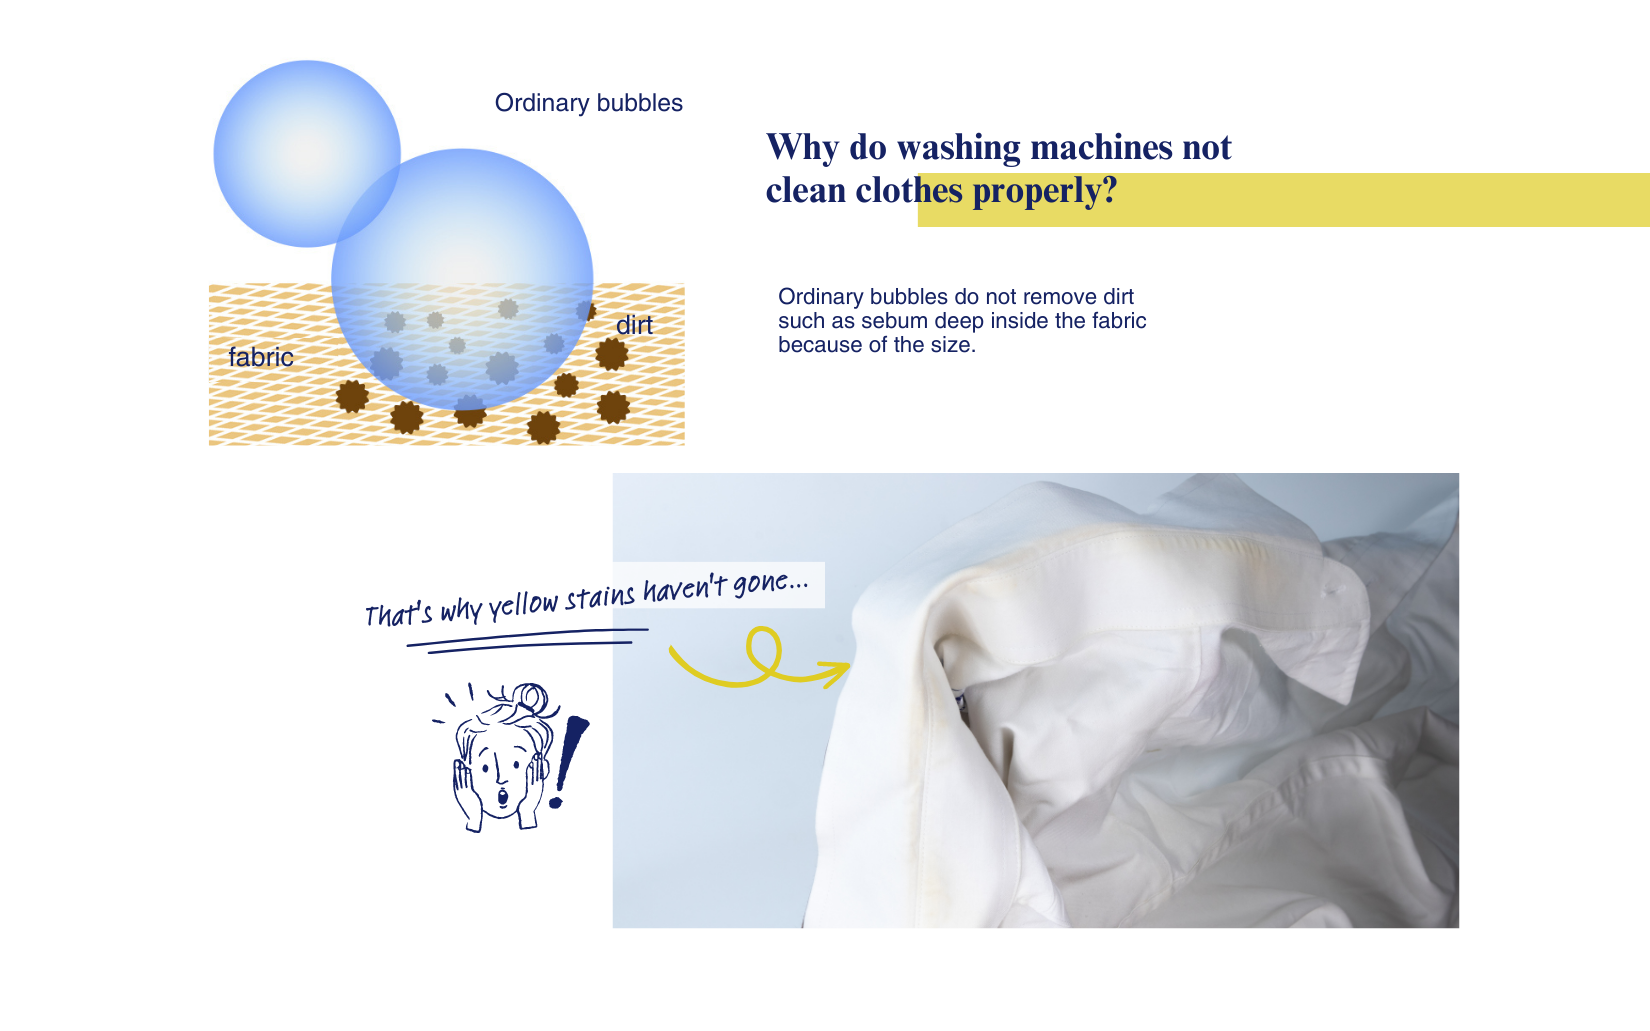 Ordinary bubbles do not remove dirt inside the fabric .